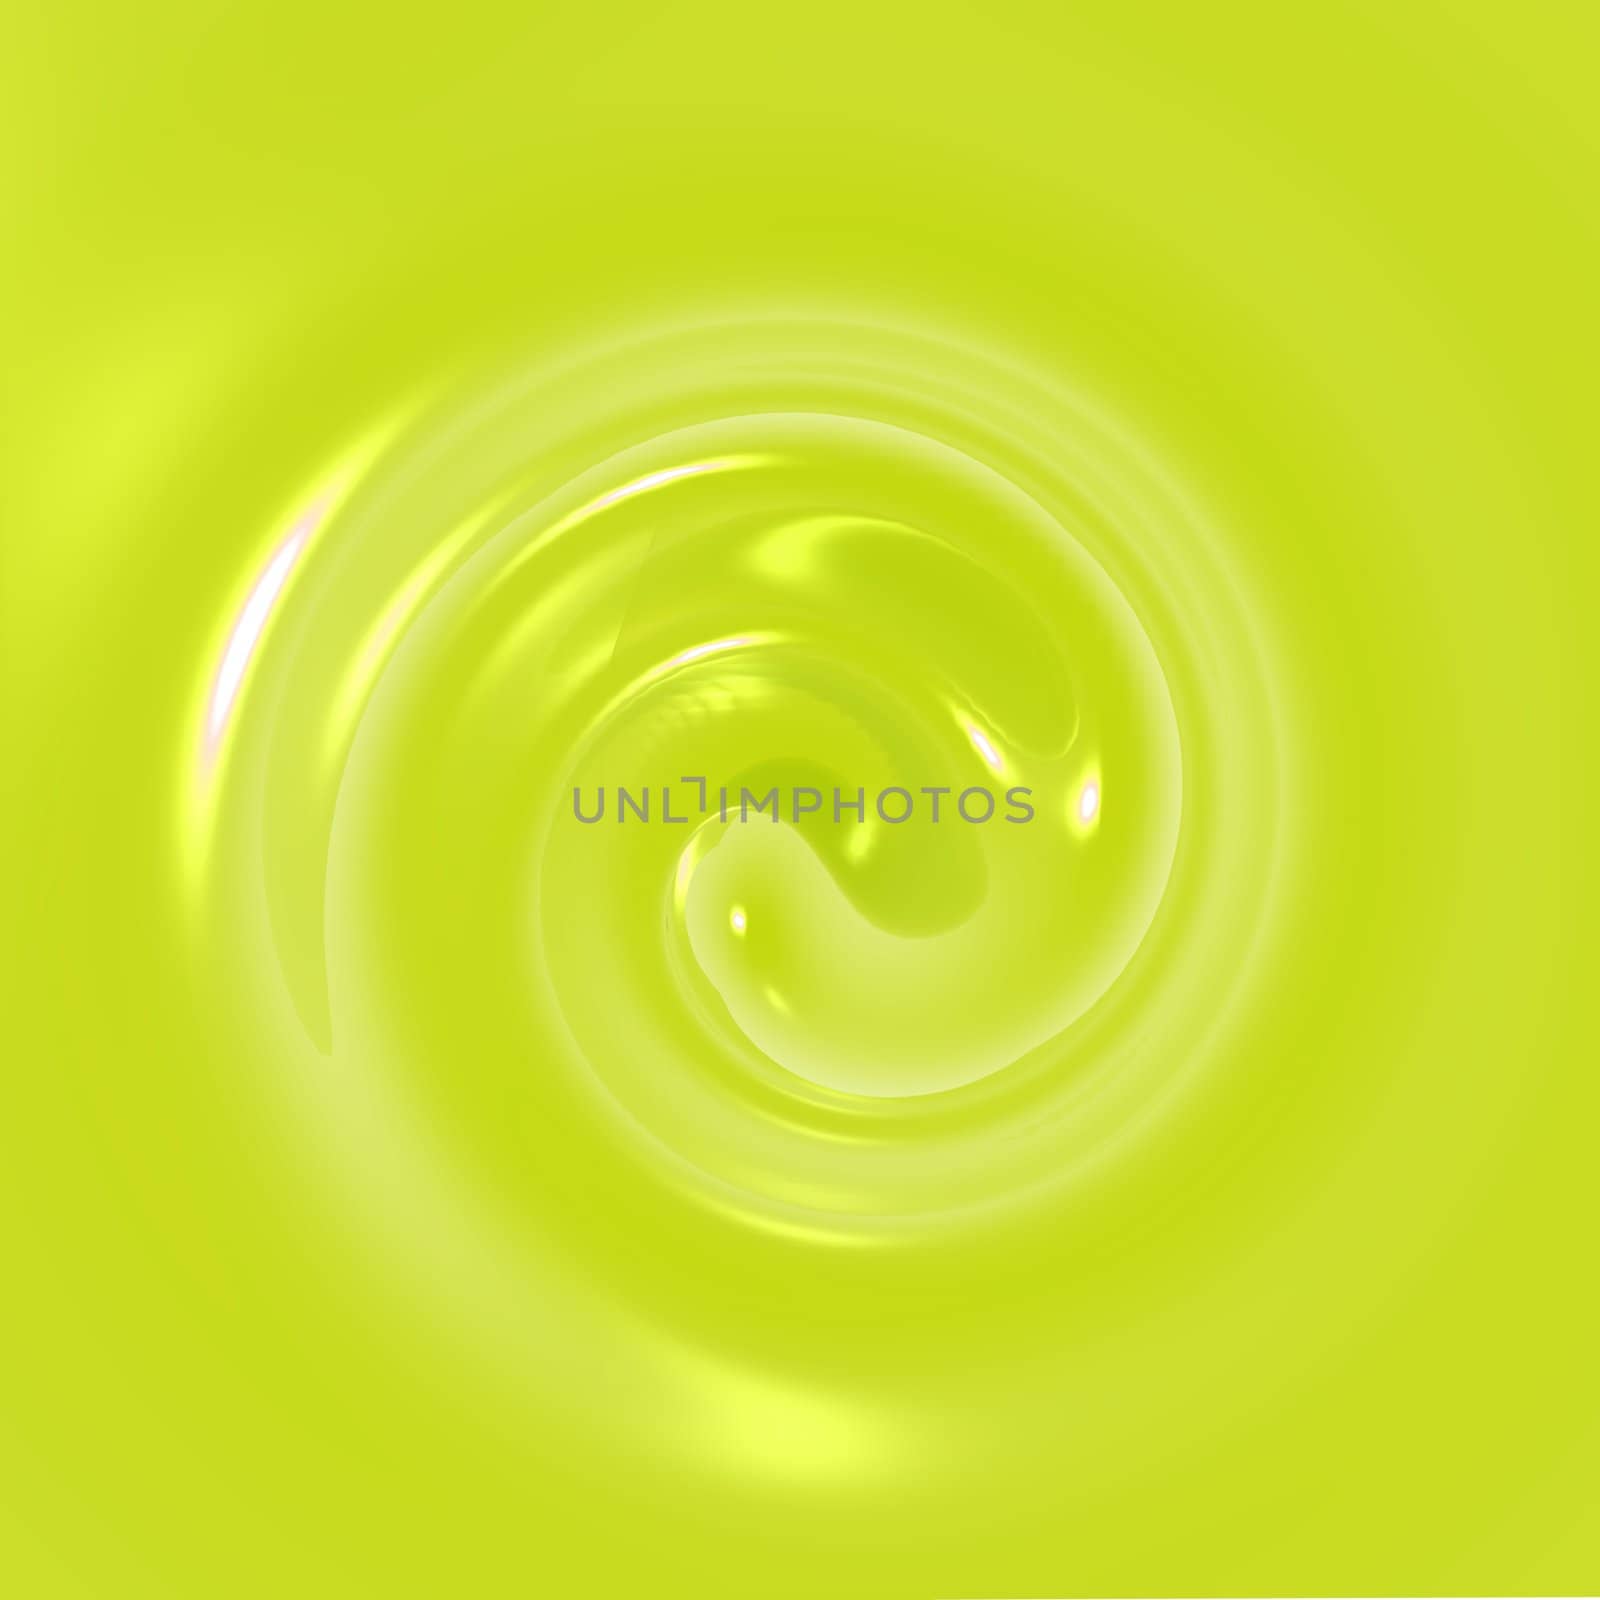 An illustration of yellow fluid swirling.